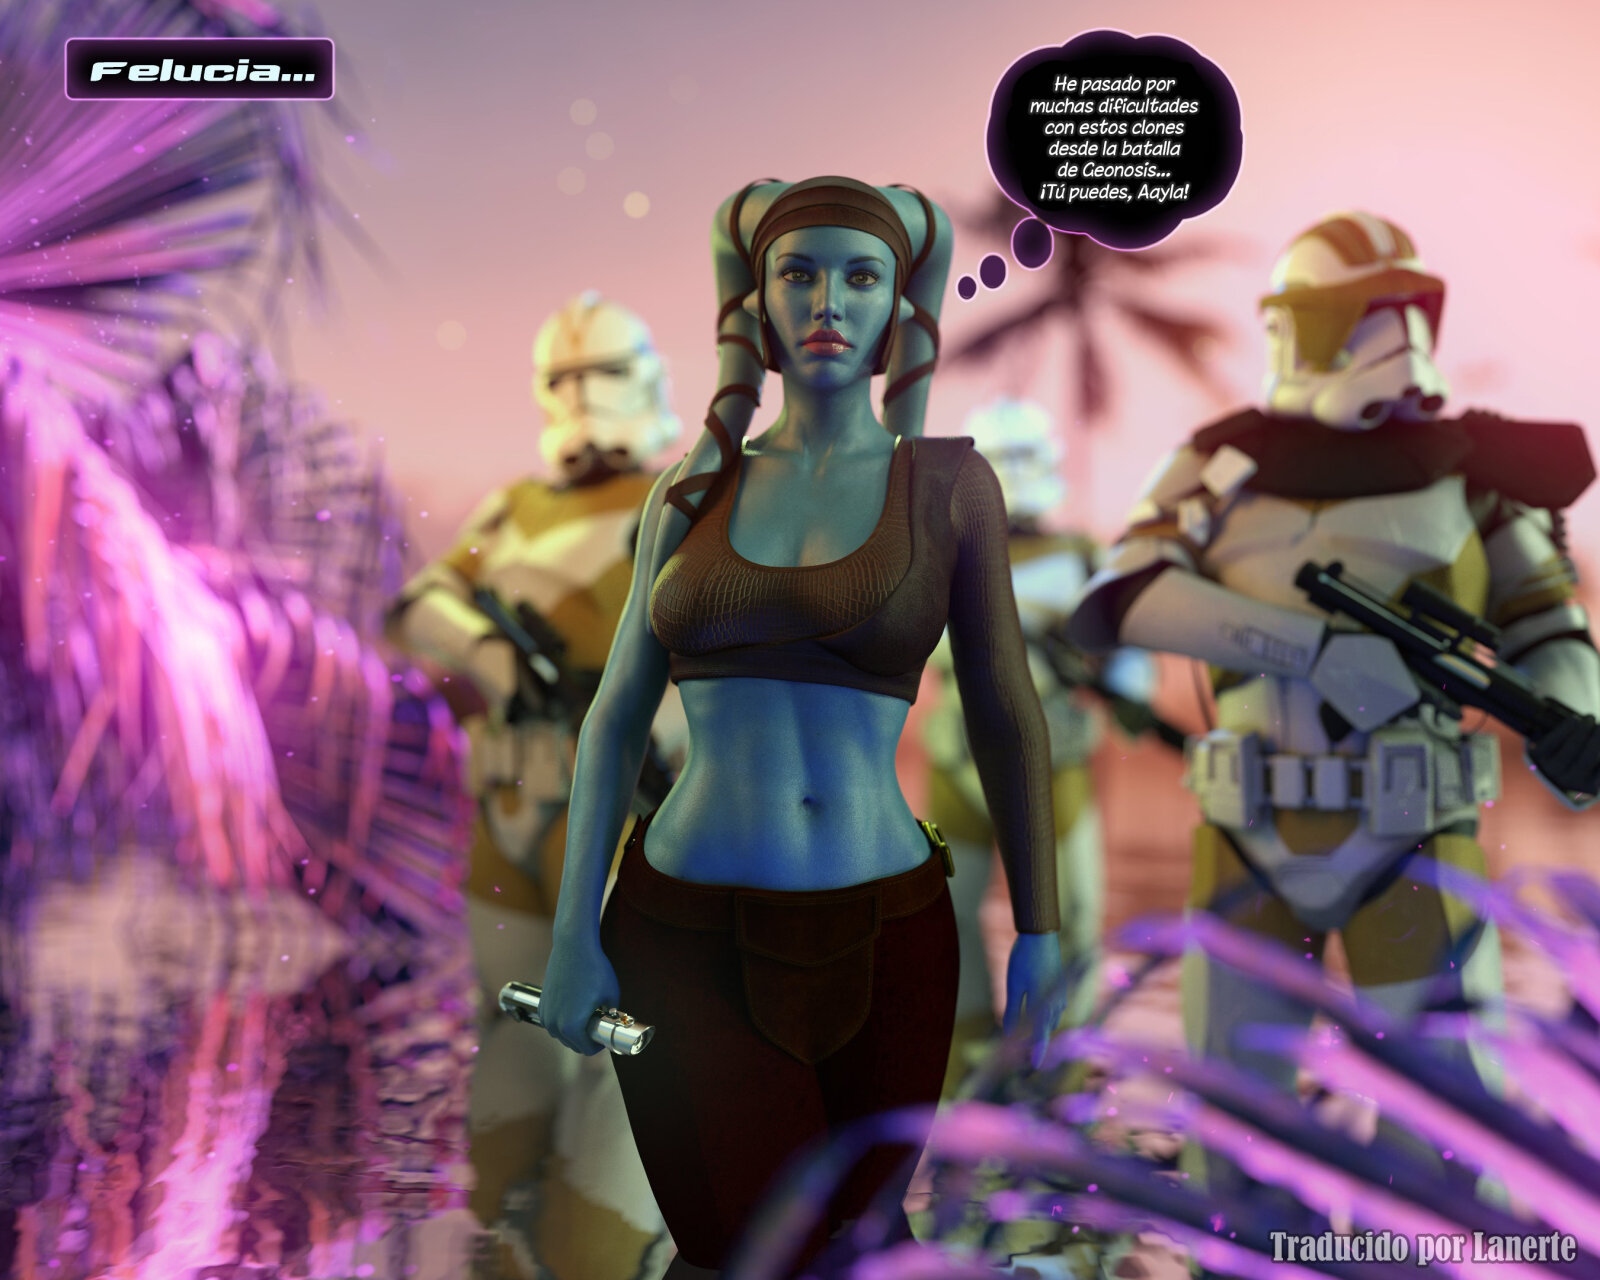 Aayla Secura and Her Clones - 0